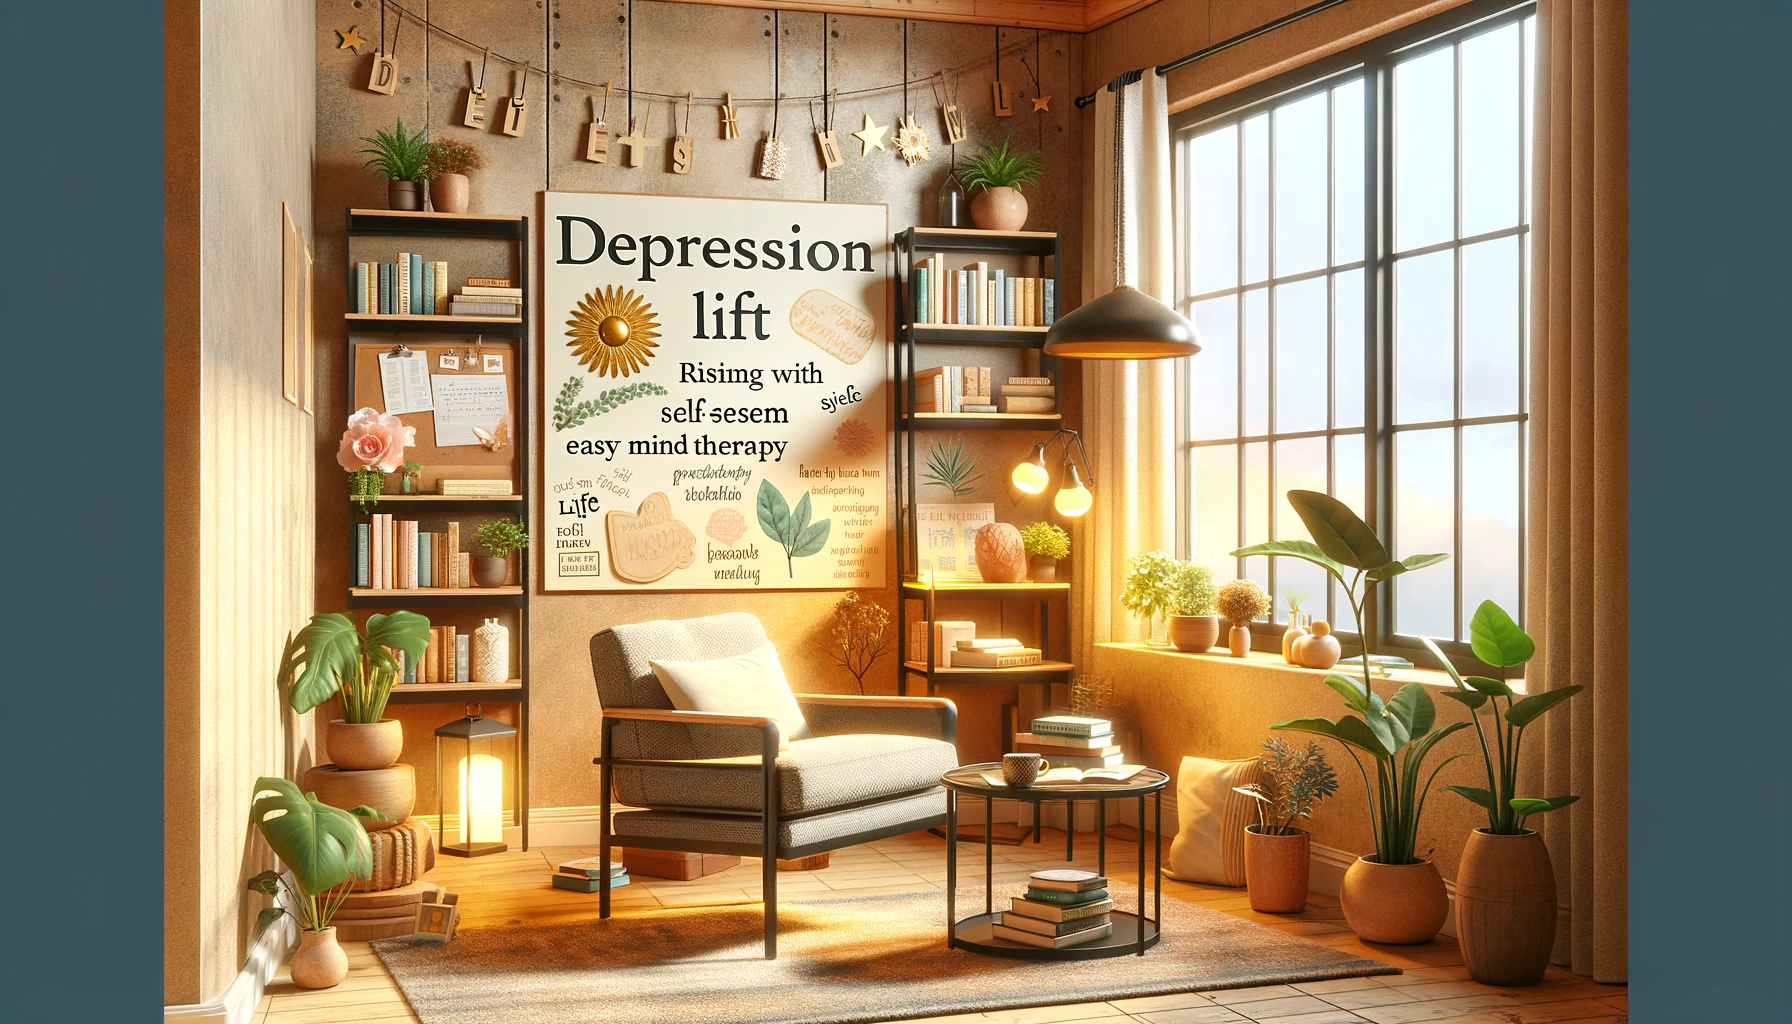 Depression Lift: Rising with Self Esteem through Easy Mind Therapy